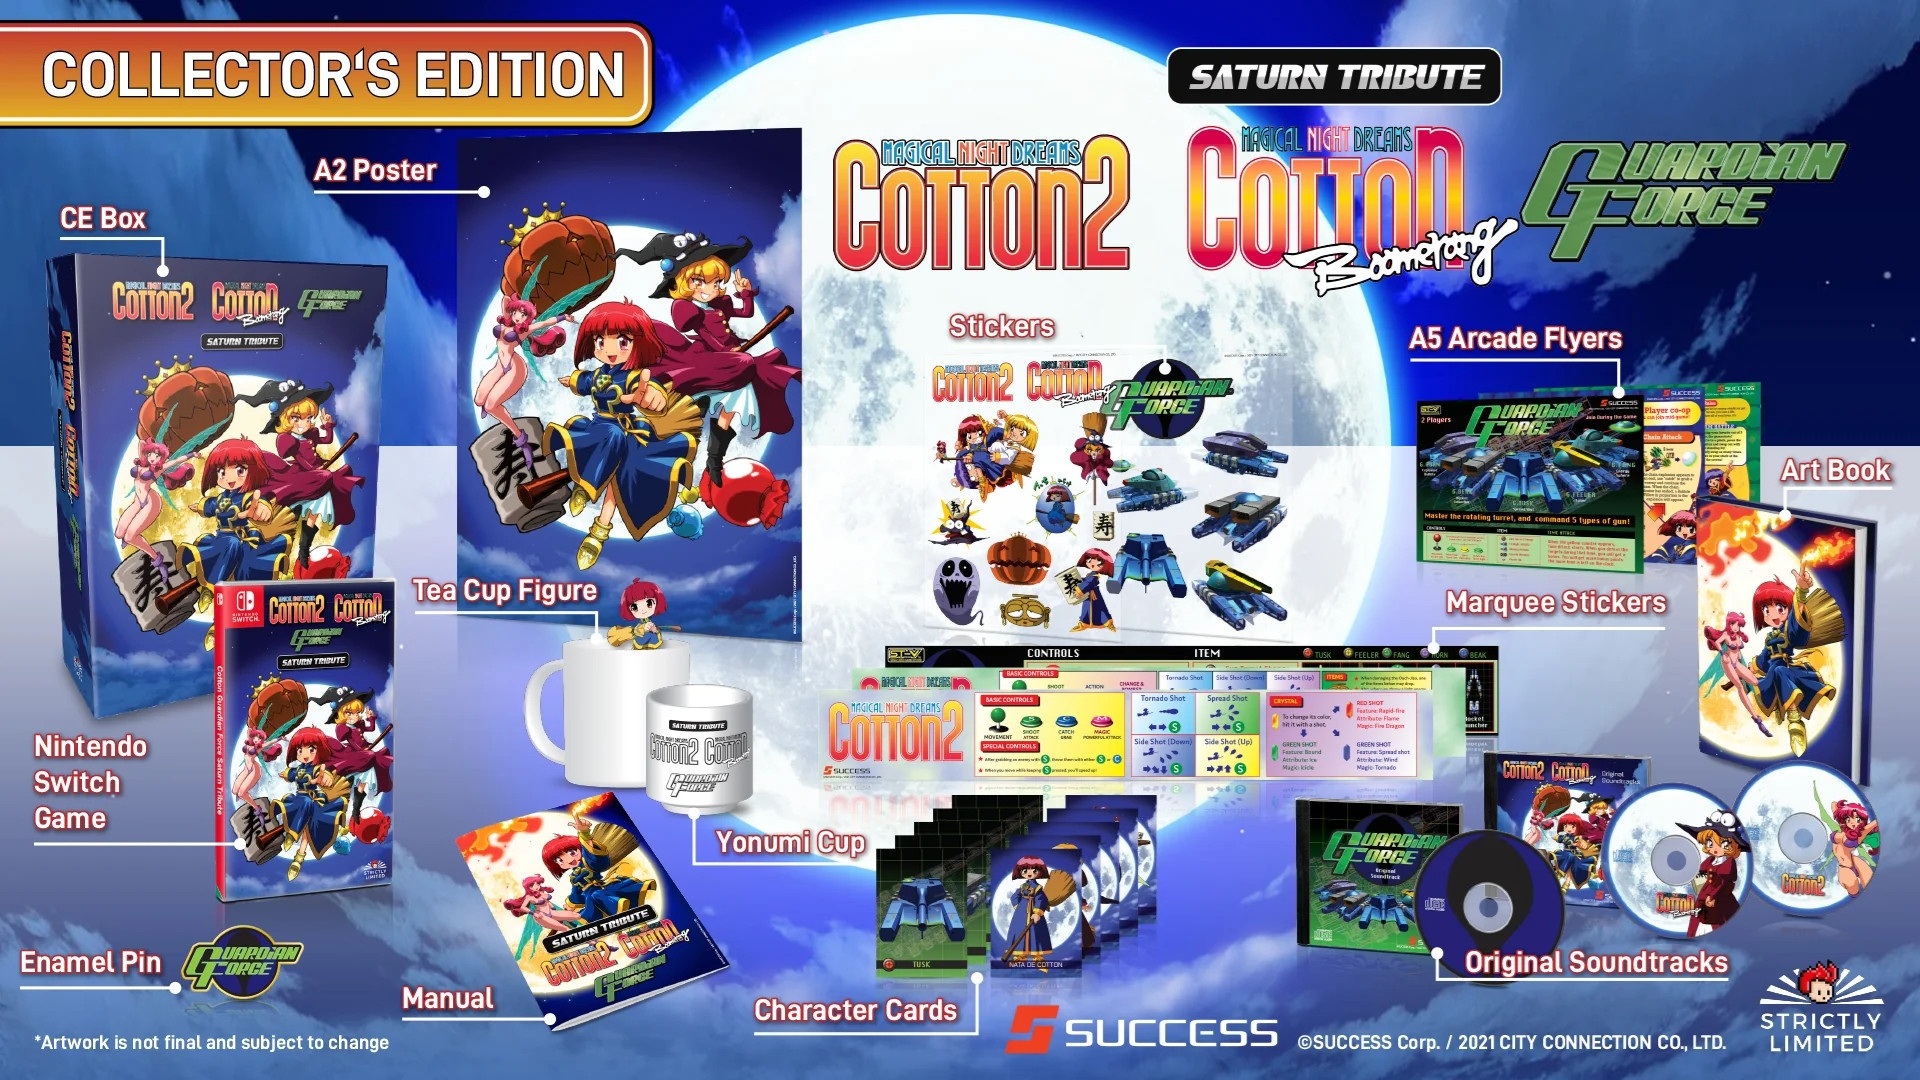 Cotton Guardian Force Saturn Tribute Collector's Edition